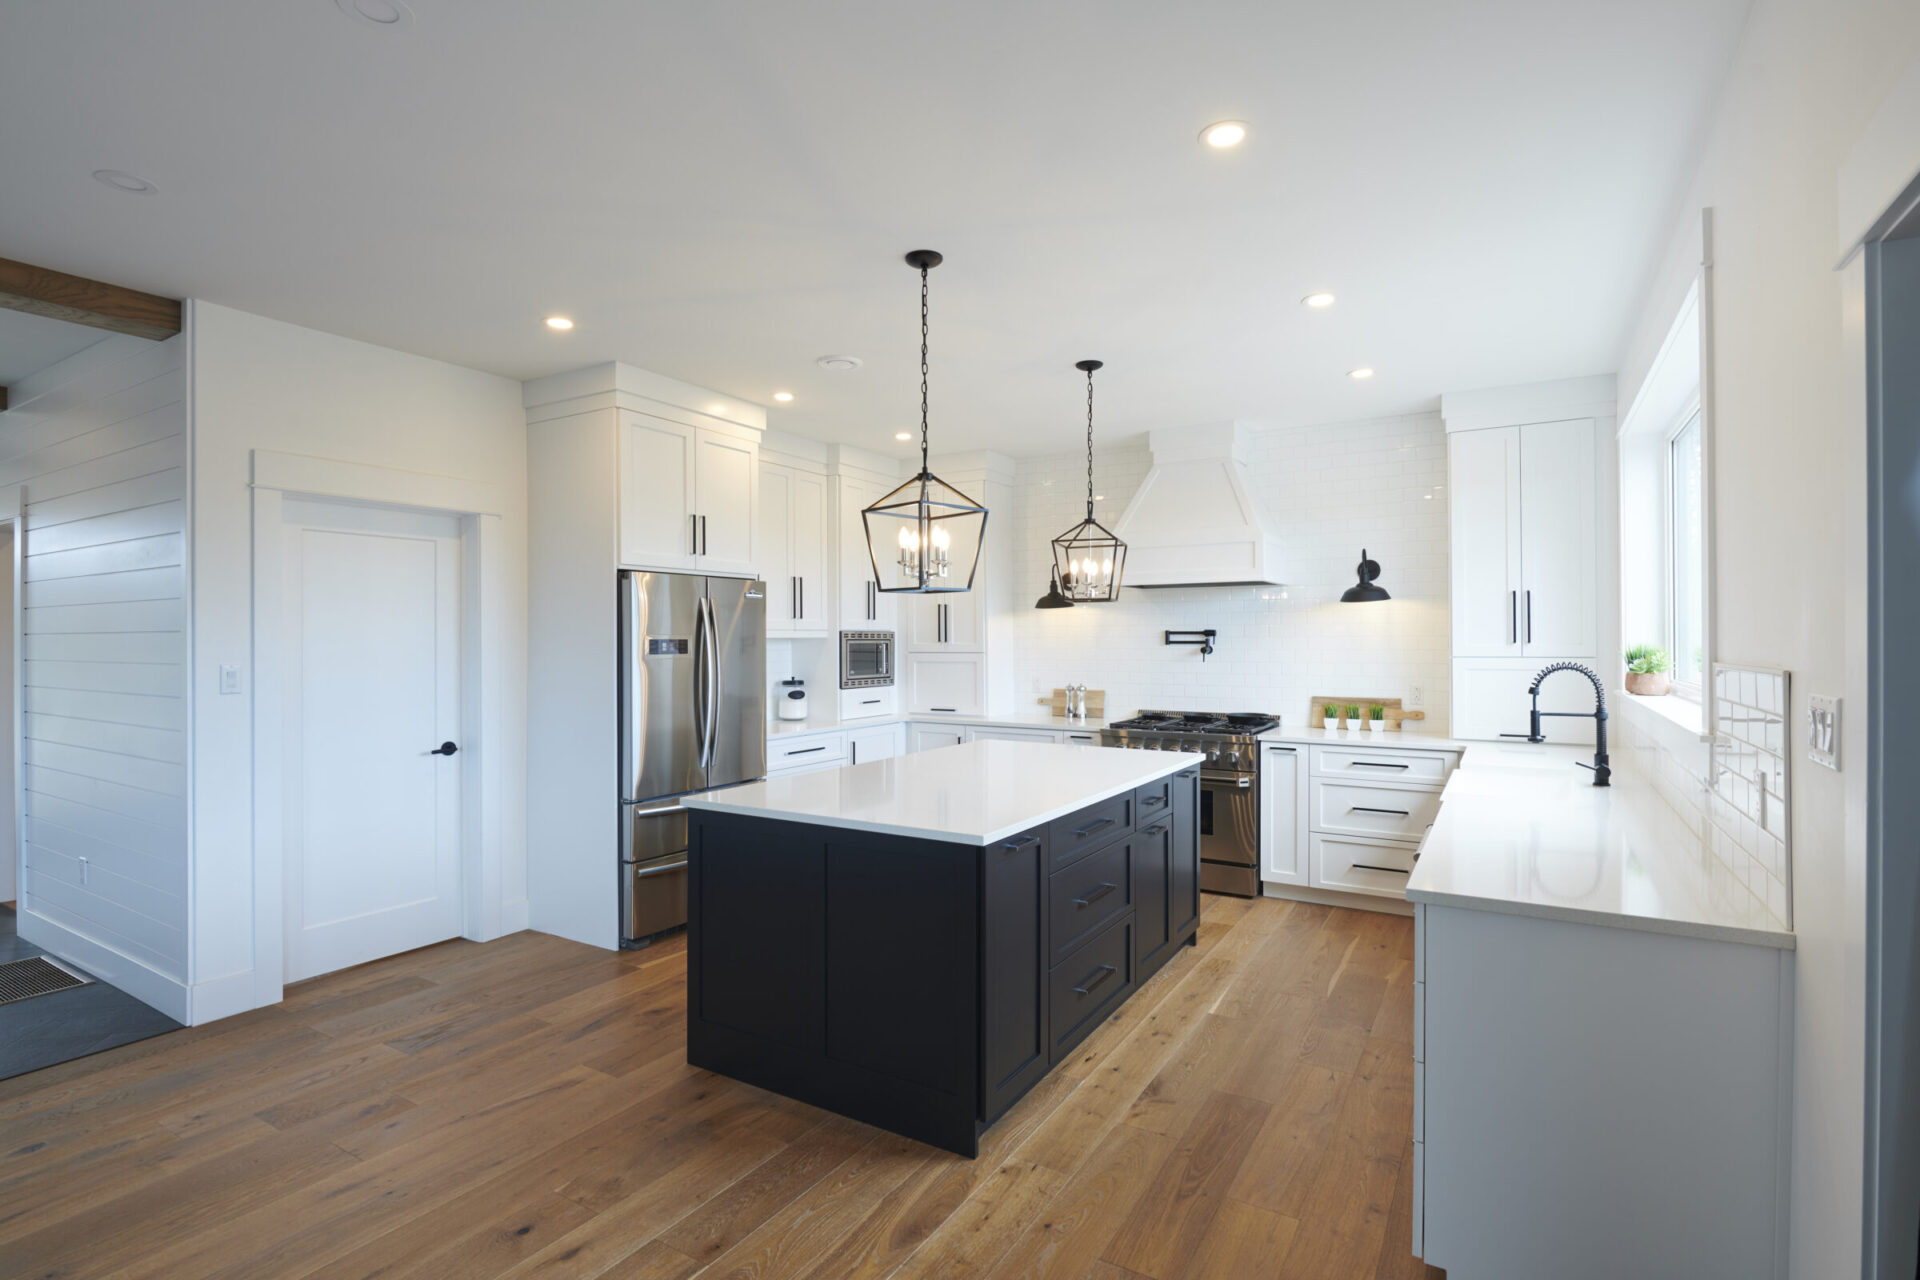 A spacious modern kitchen with white cabinets, a central black island, stainless steel appliances, hardwood floors, and pendant lighting fixtures.